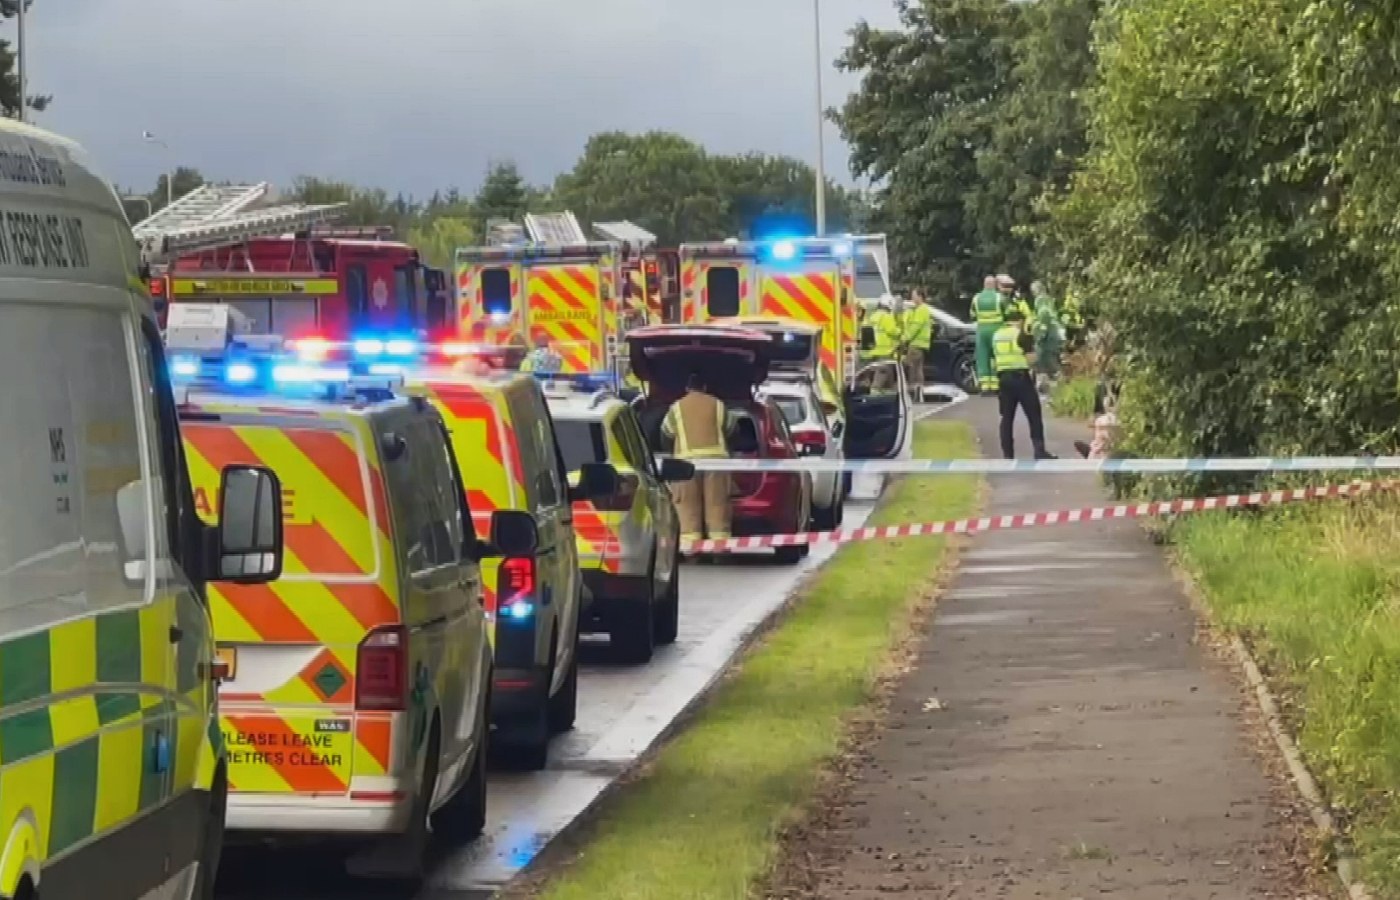 Emergency services were called to the B902 New Carron Road on Saturday, July 29 at around 6.10pm to reports of a collision involving two cars.